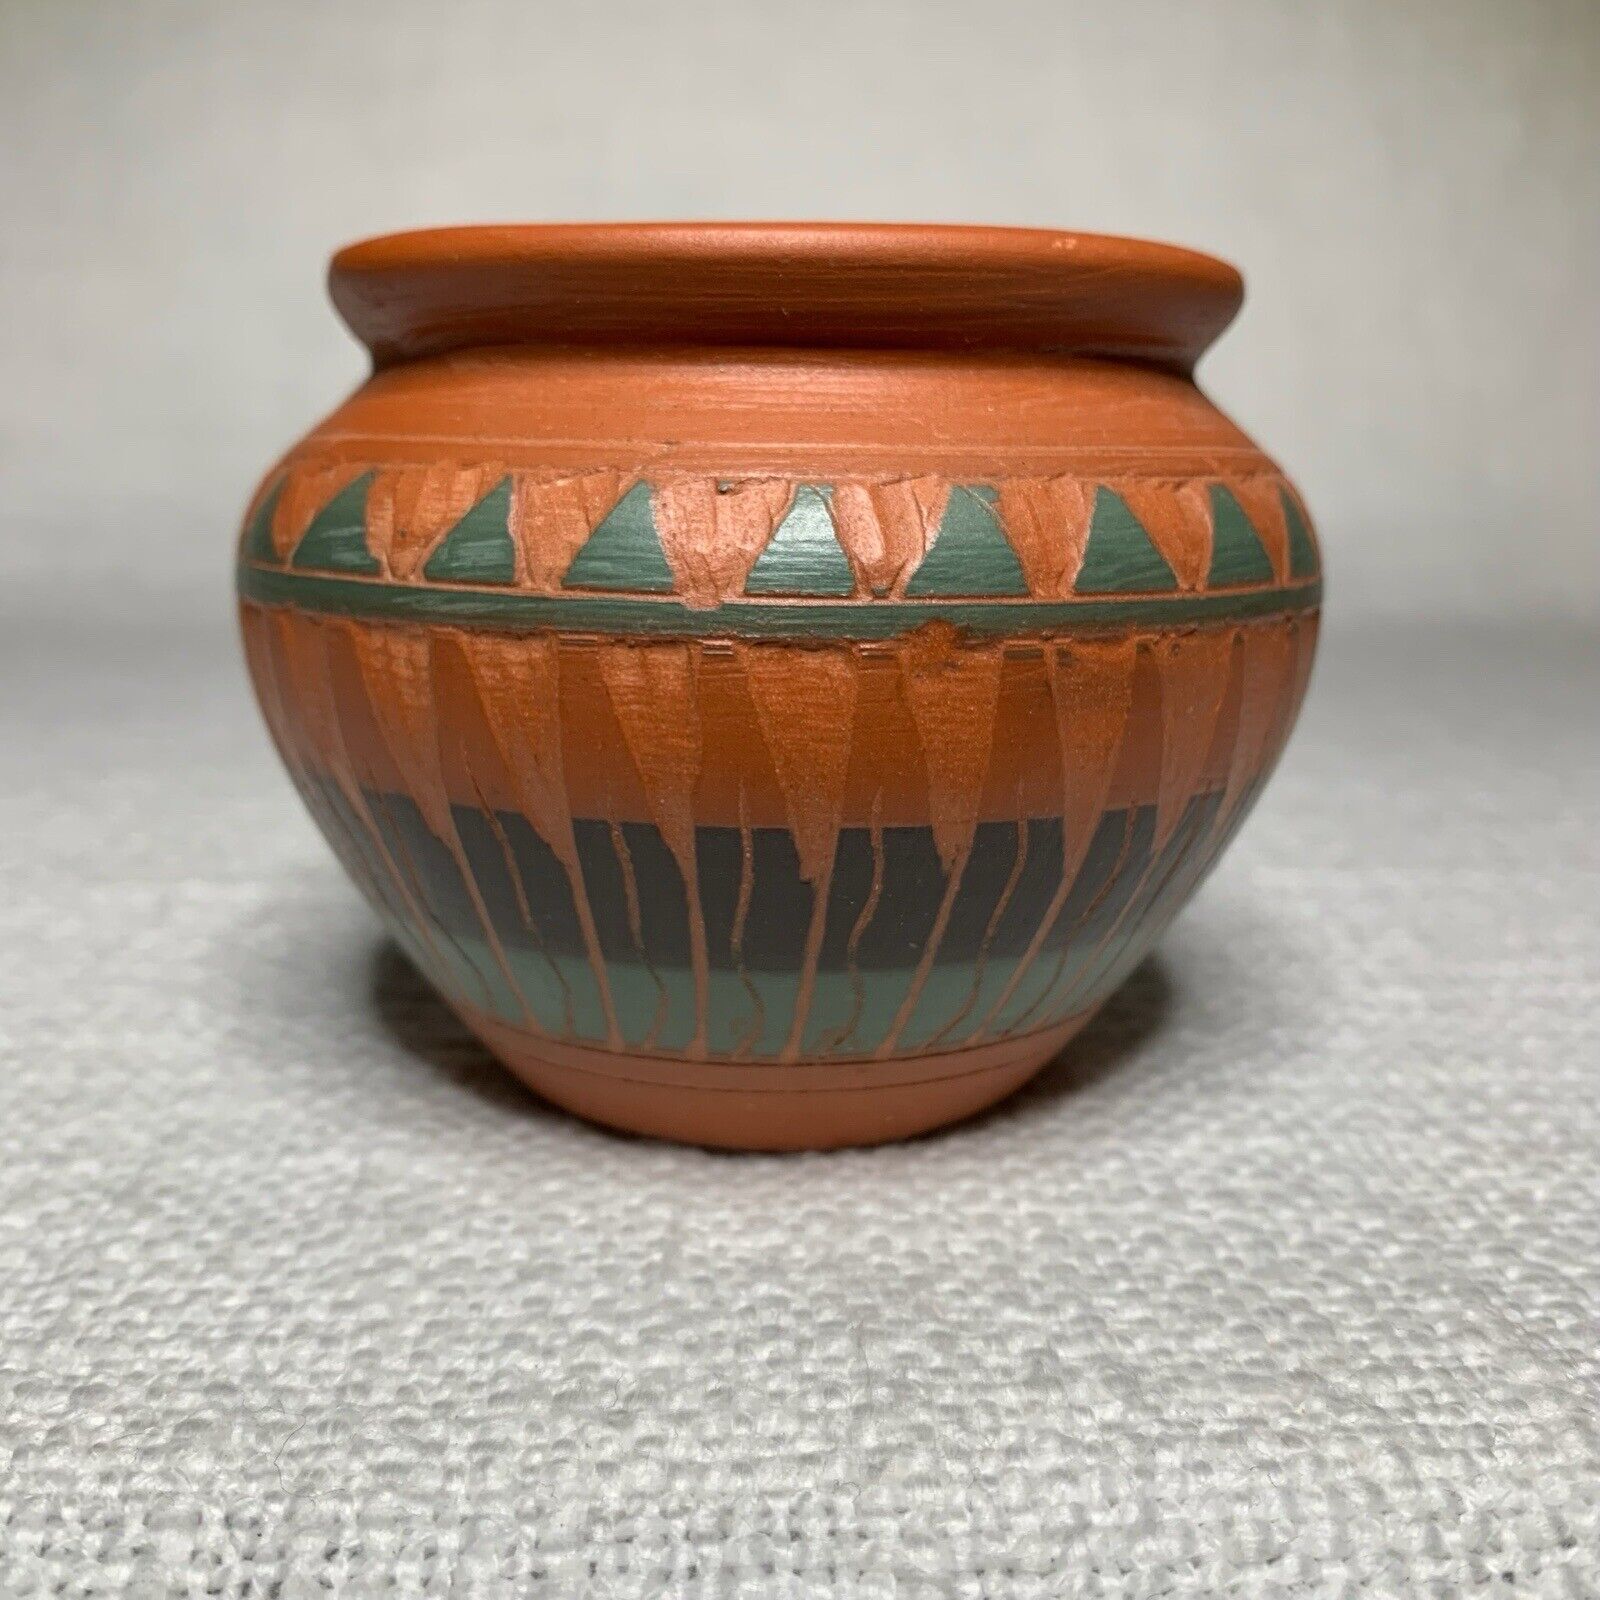 Navajo Pottery Pot Vase Hand Etched Signed by the Artist on the Base 3” tall